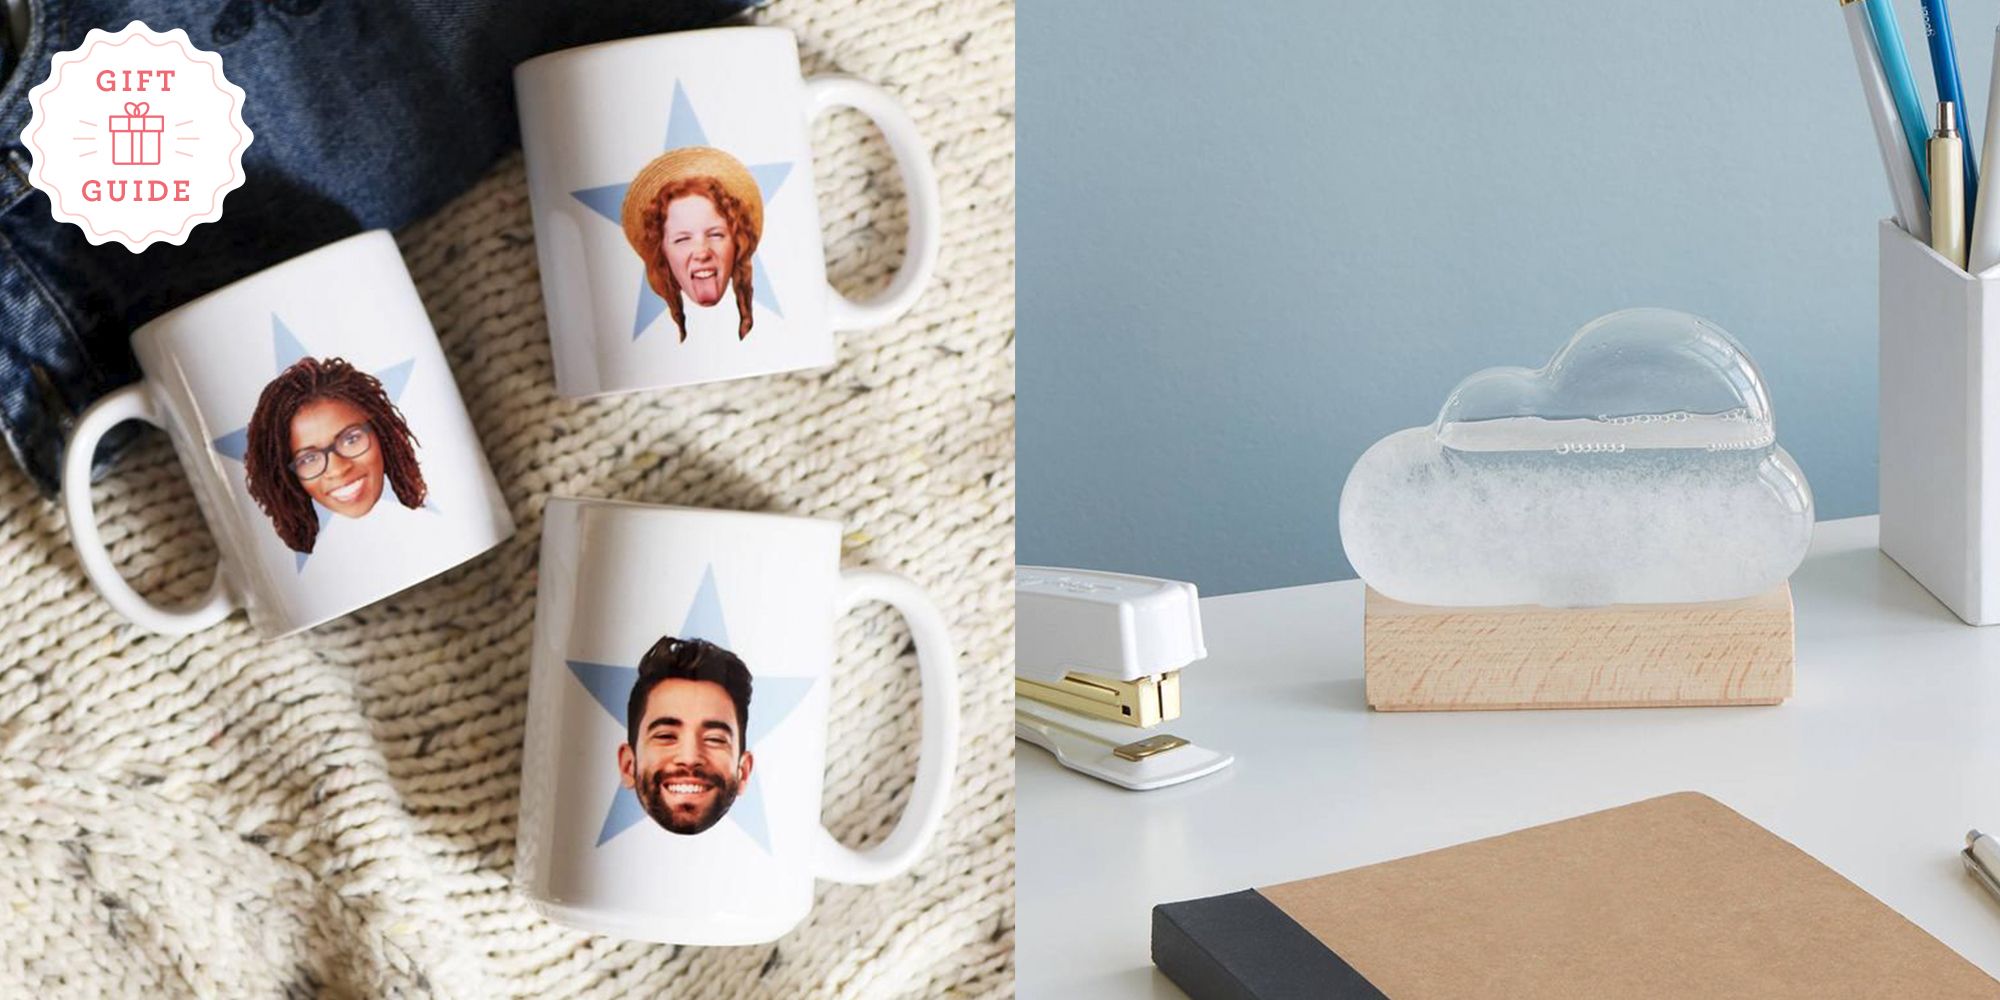 40 Best Gifts For Coworkers (And Your Boss) That Are Inexpensive